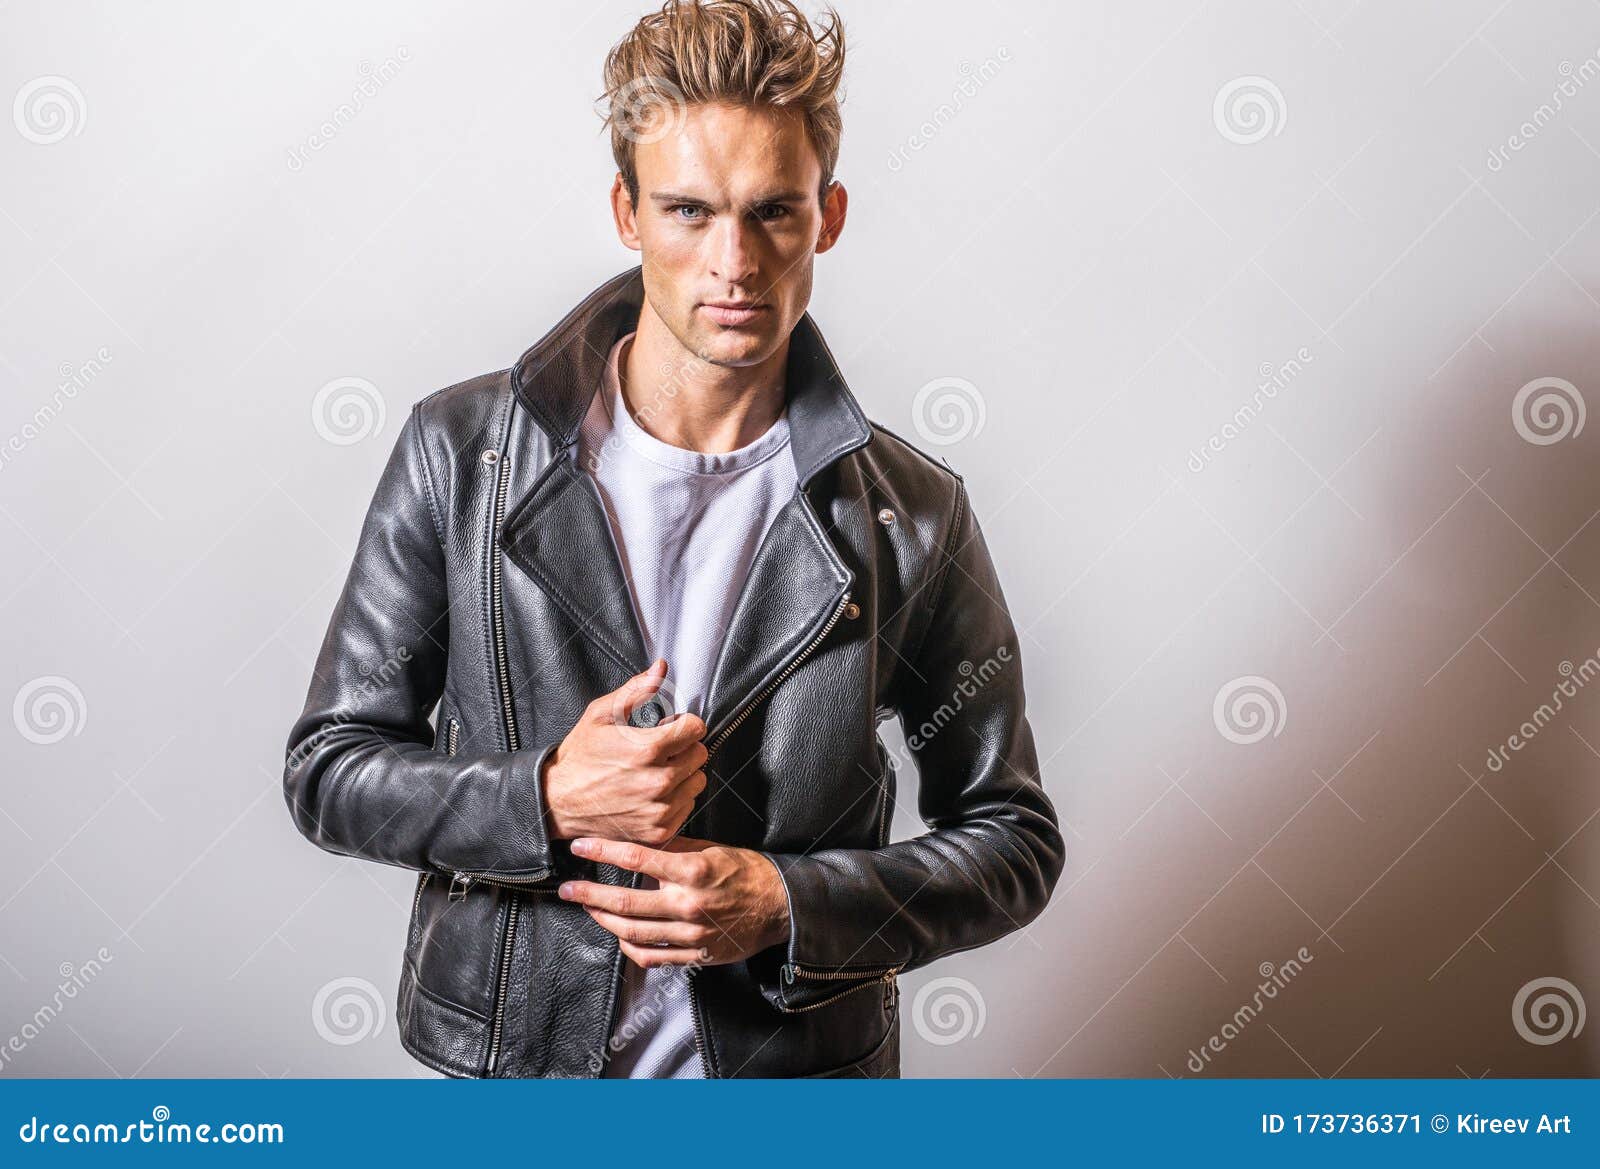 Handsome Young Man in Classic Leather Jacket. Stock Image - Image of ...